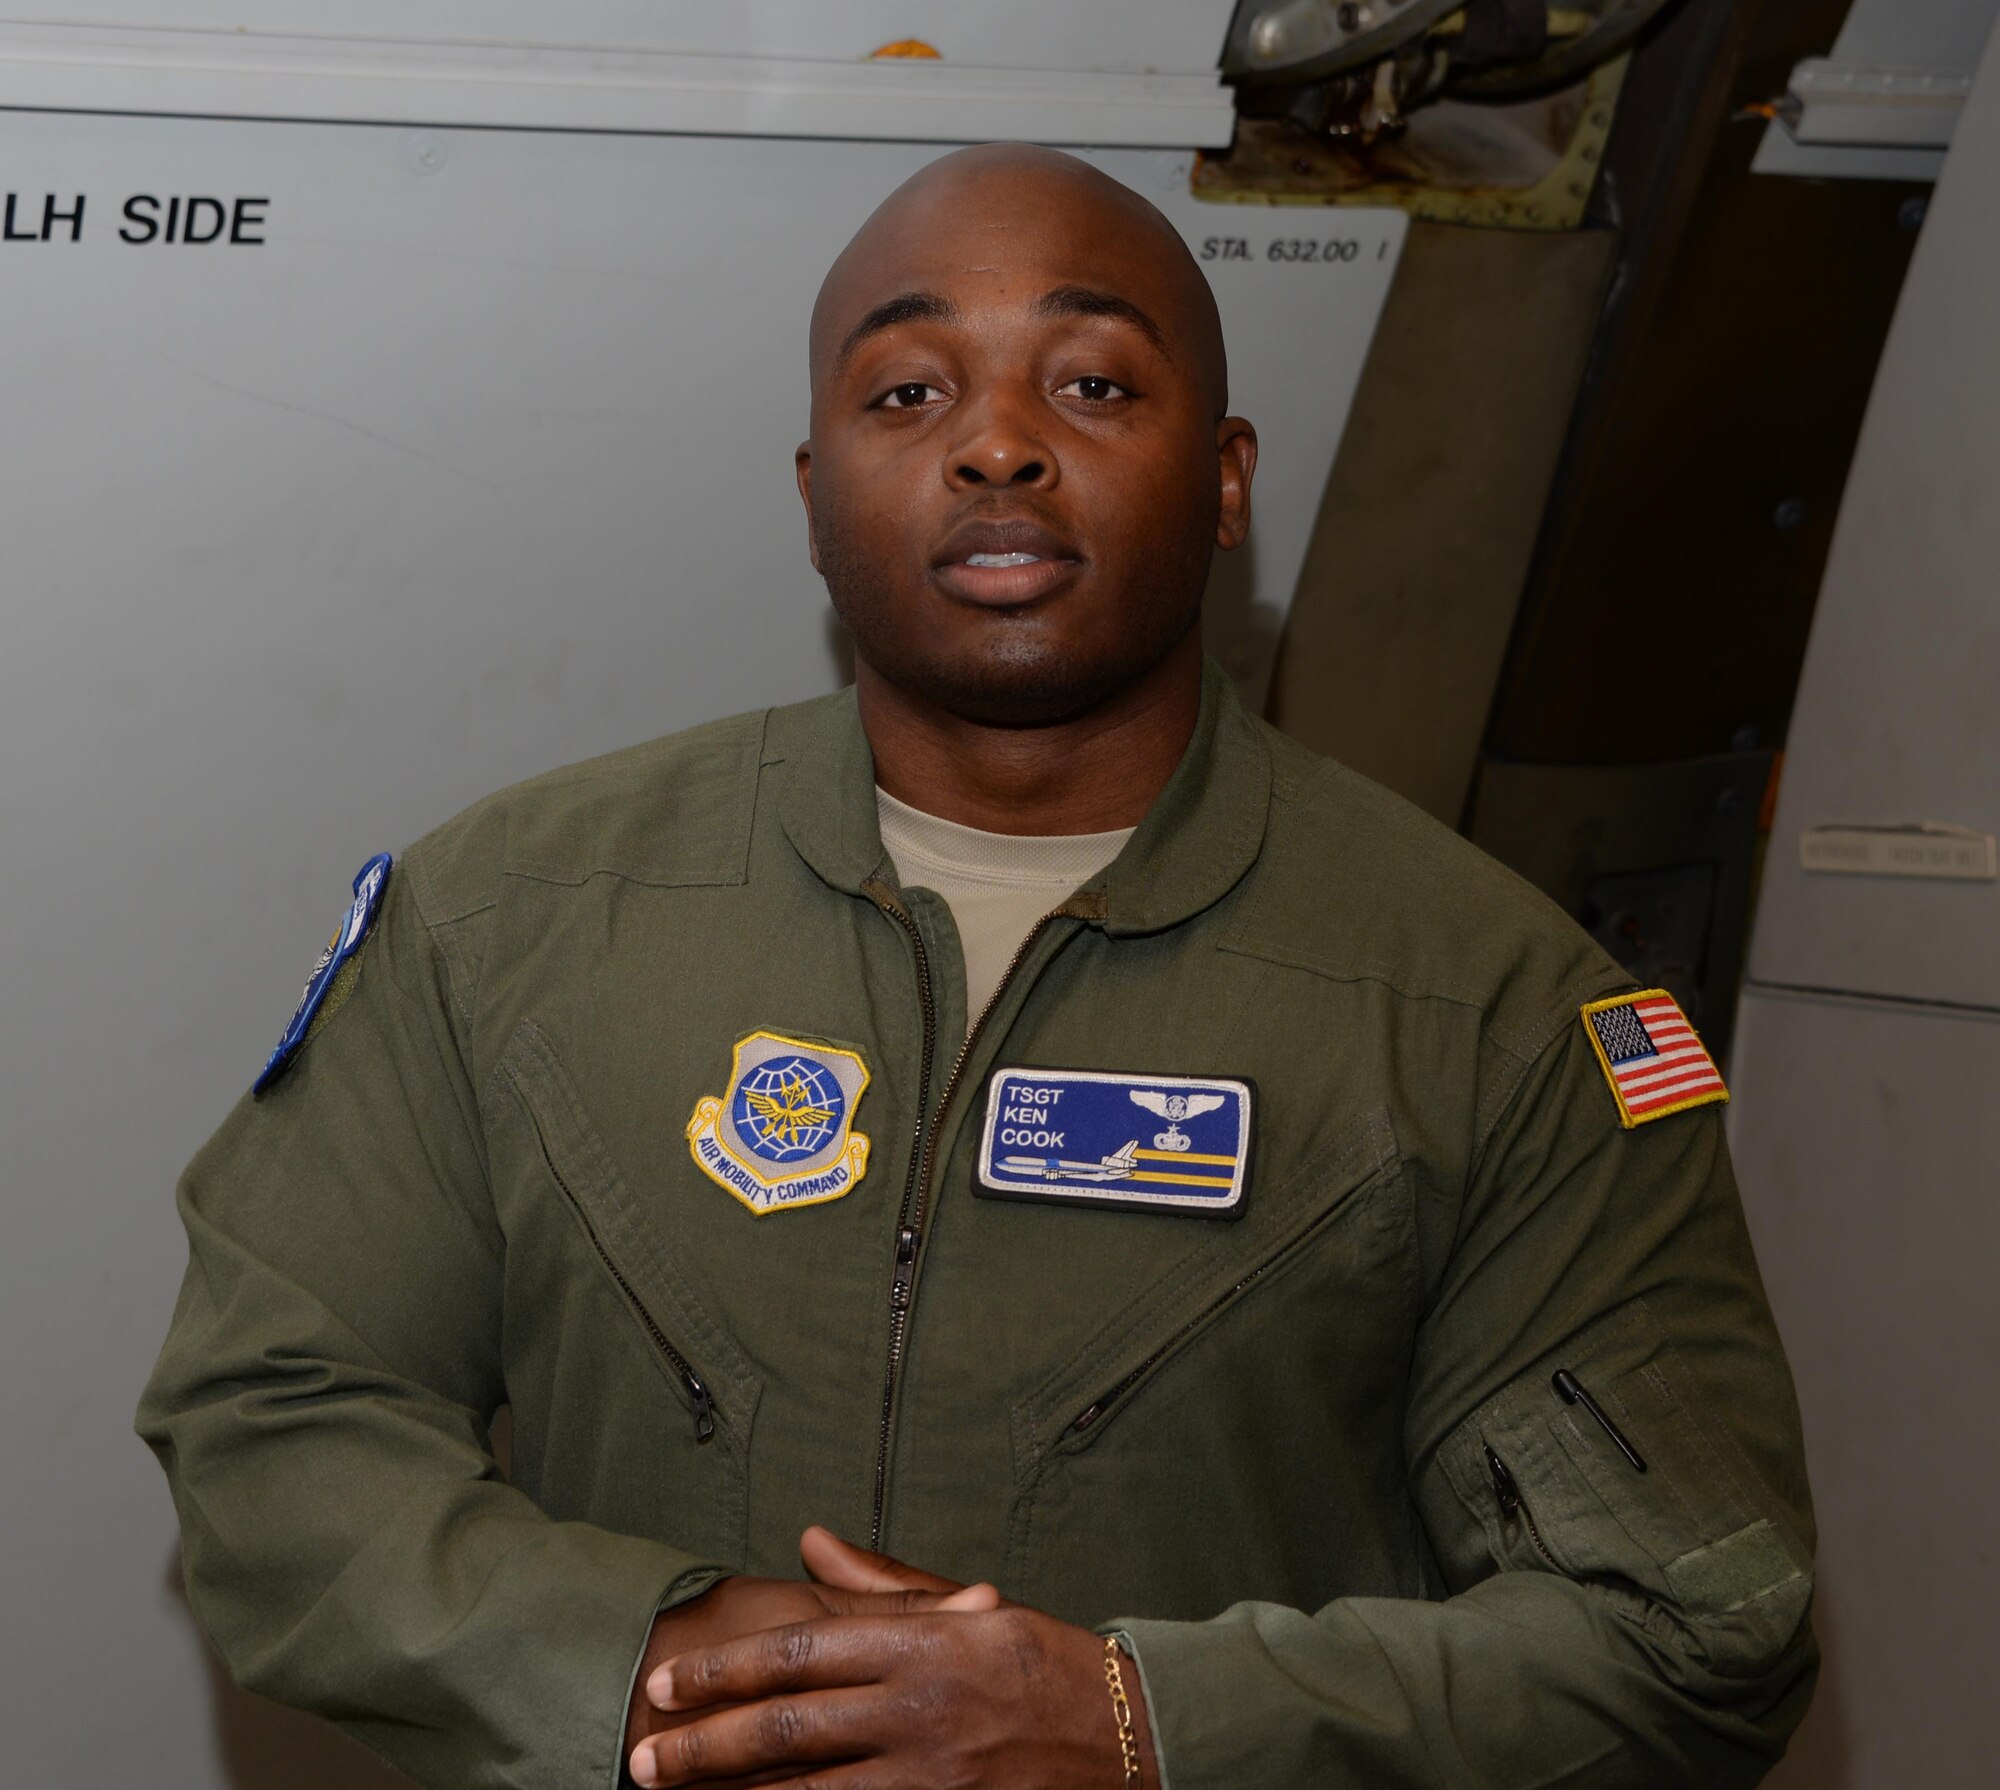 Tech. Sgt. Kenneth Cook, 6th Air Refueling Squadron, poses for a photo inside a KC-10 Extender at Travis Air Force Base, Calif., June 17, 2017, prior to the start of loading operations. Cook oversaw the loading of the more than 15,000 pounds of cargo prior to a flight to Joint Base Pearl Harbor-Hickam, Hawaii. (U.S. Air Force photo by Tech. Sgt. James Hodgman)